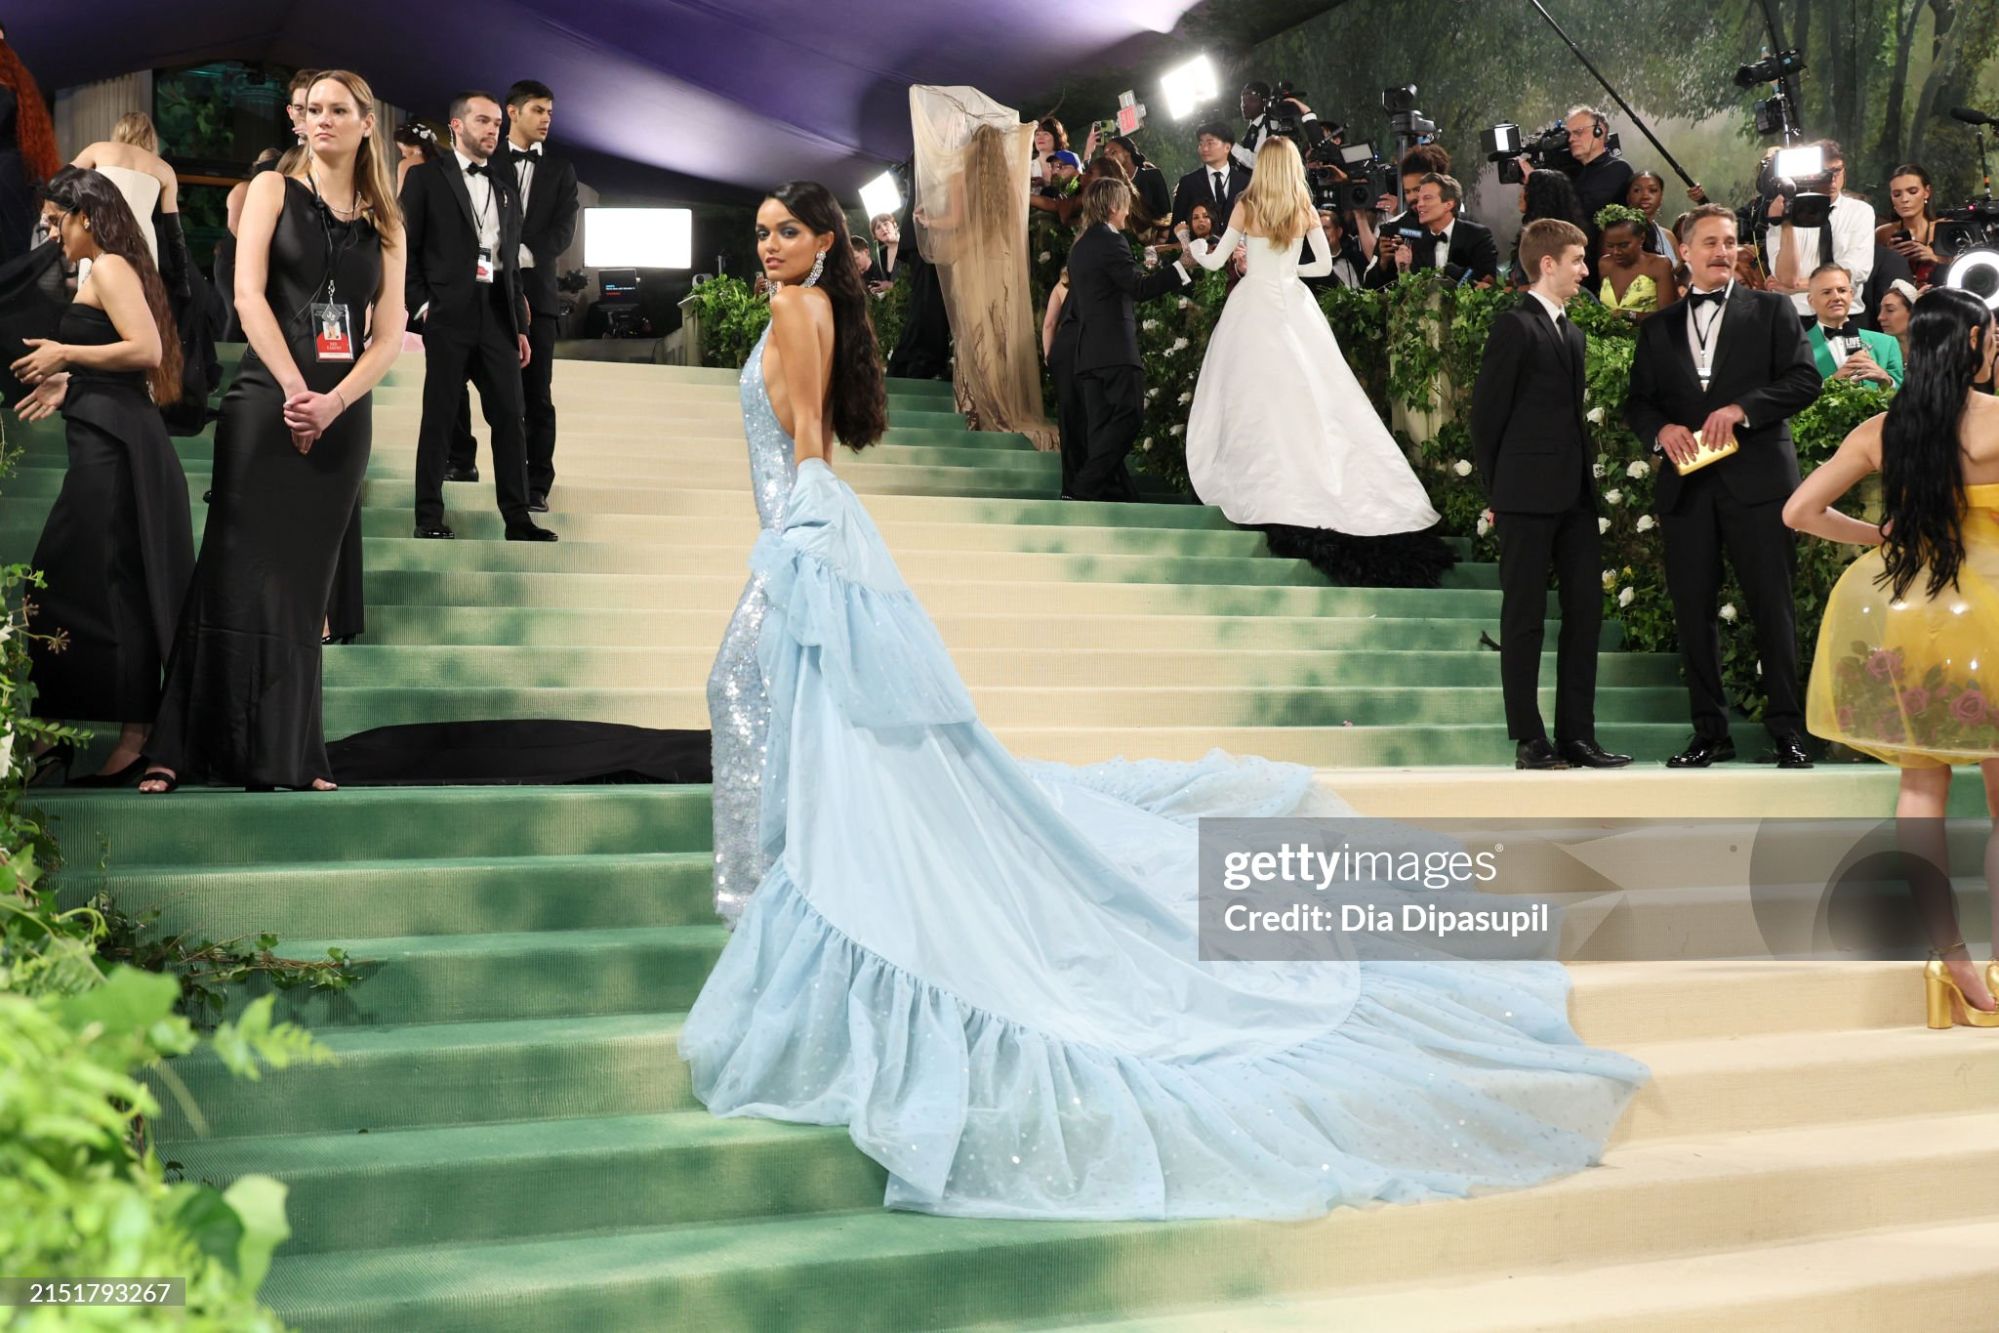 gettyimages-2151793267-2048x2048.jpg